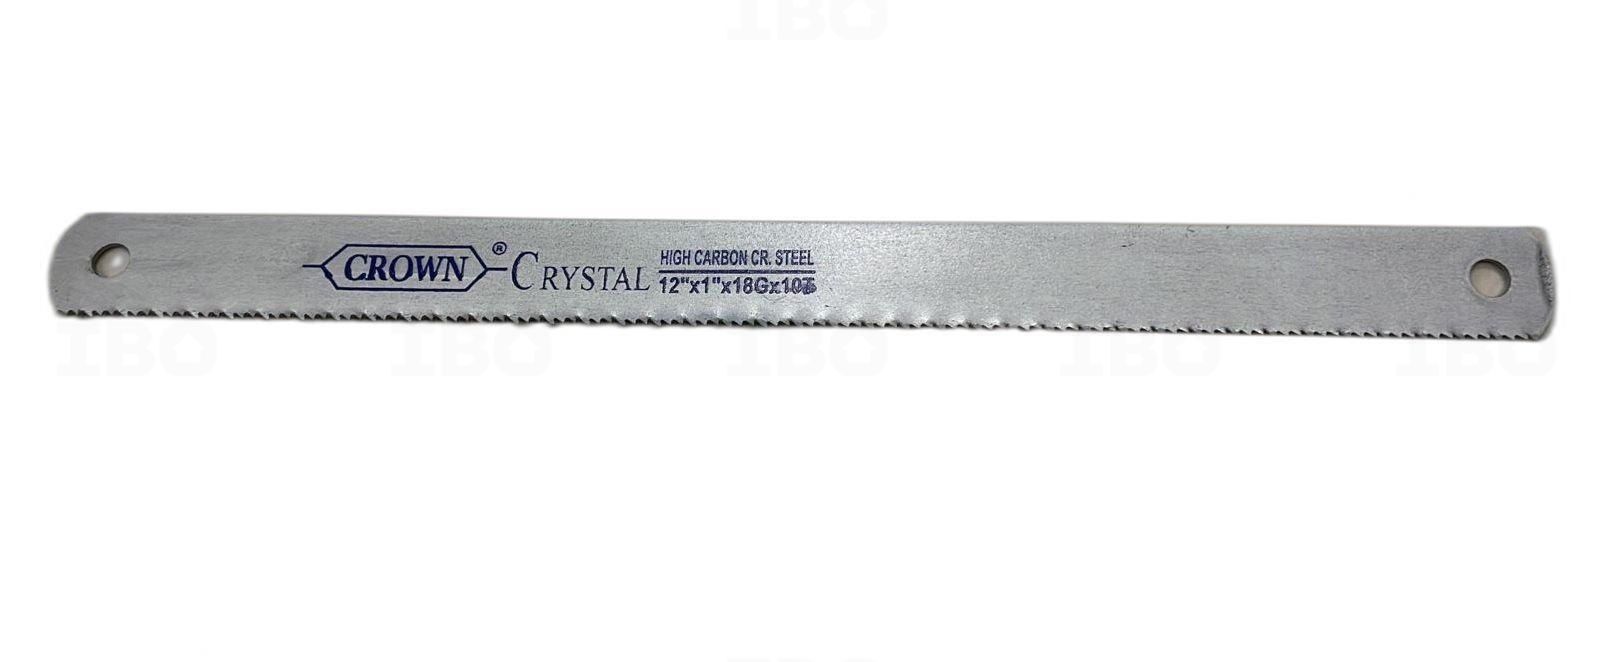 Crown Crystal Halo double sided Hack saw Blade 1 inch